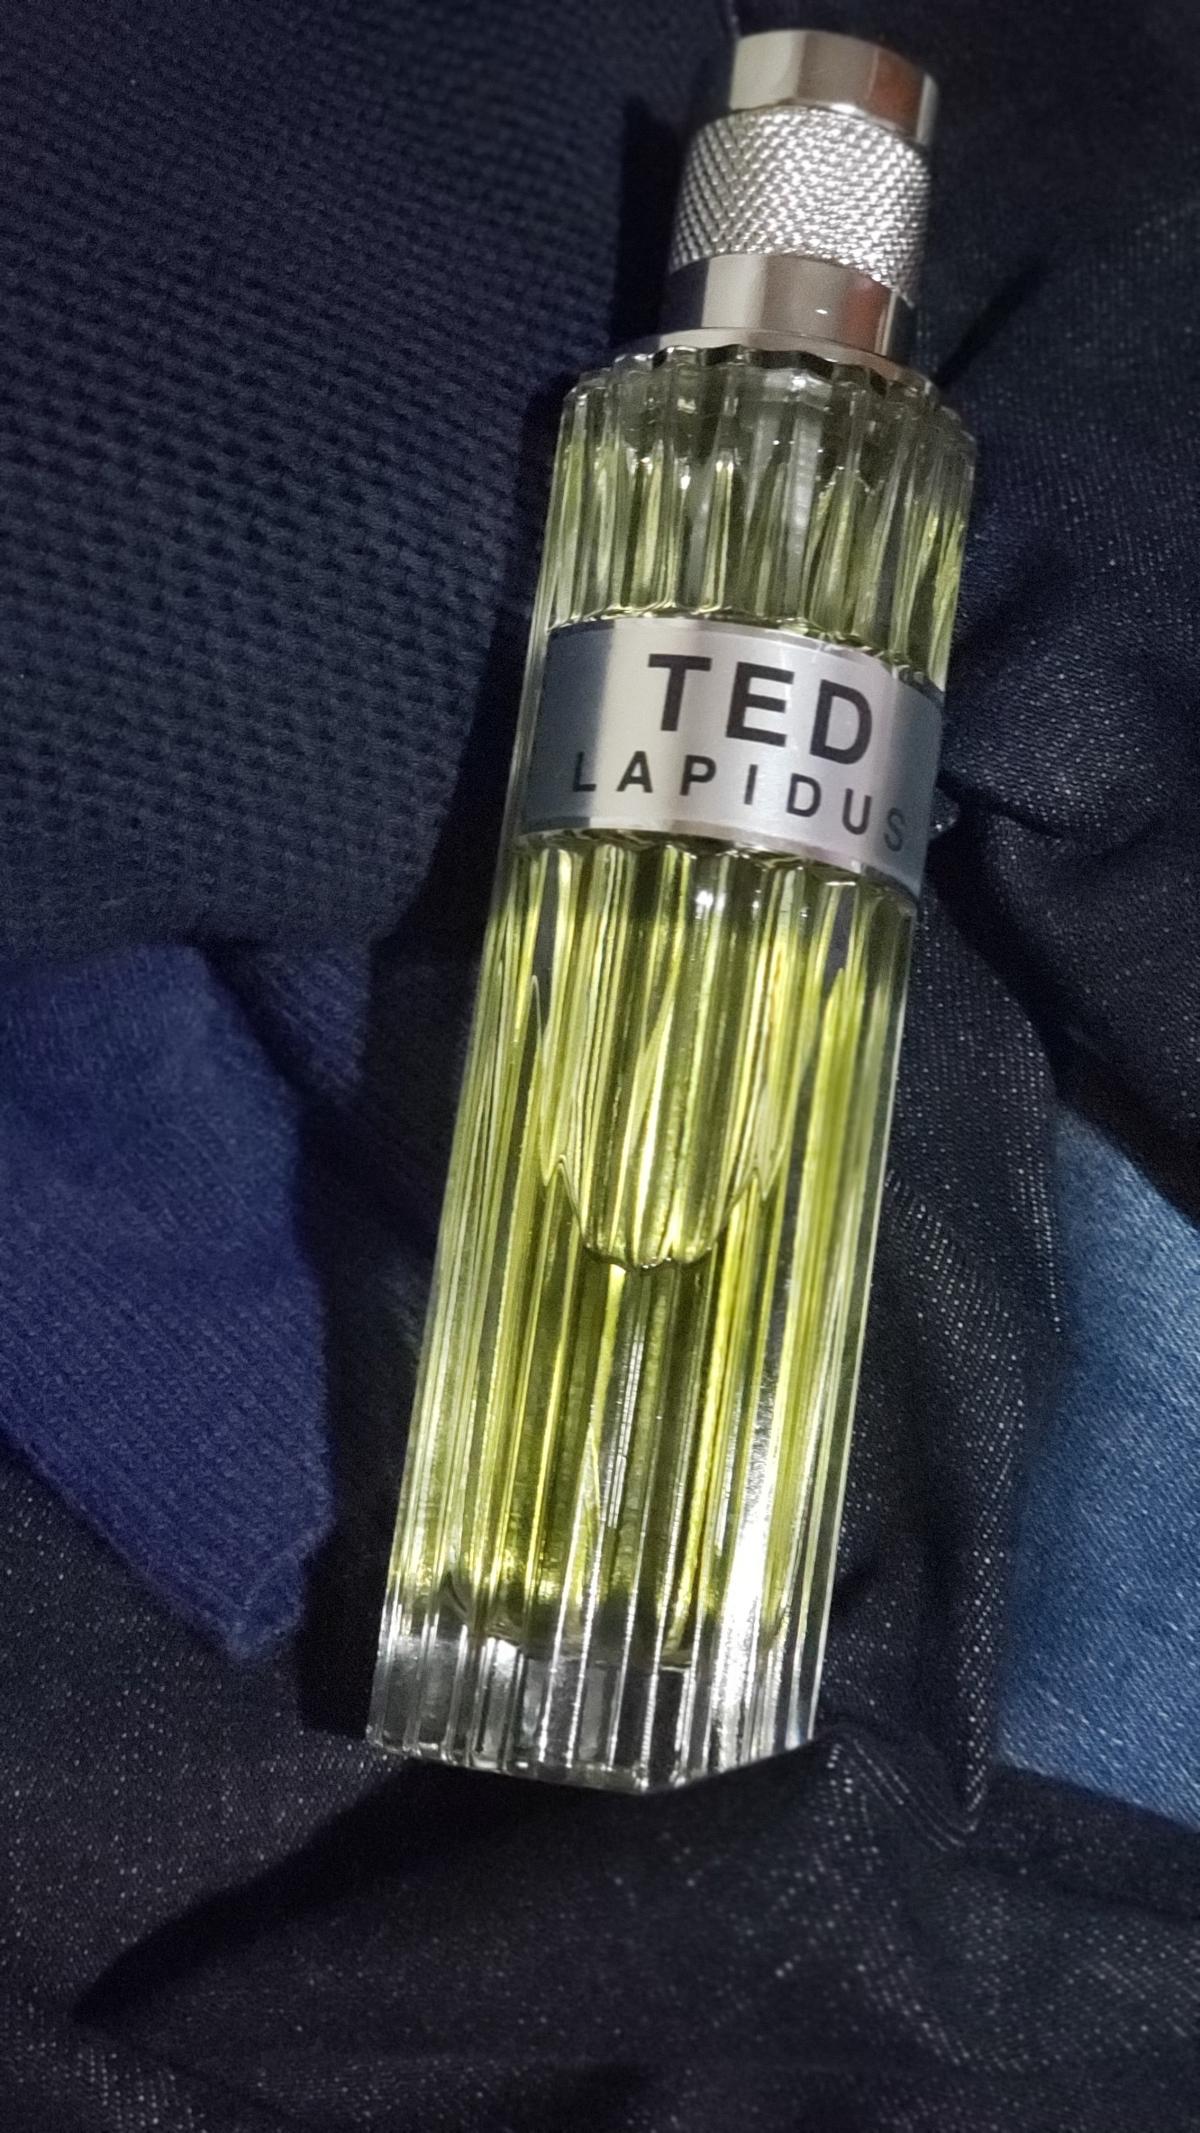 Ted Ted Lapidus cologne - a fragrance for men 1999